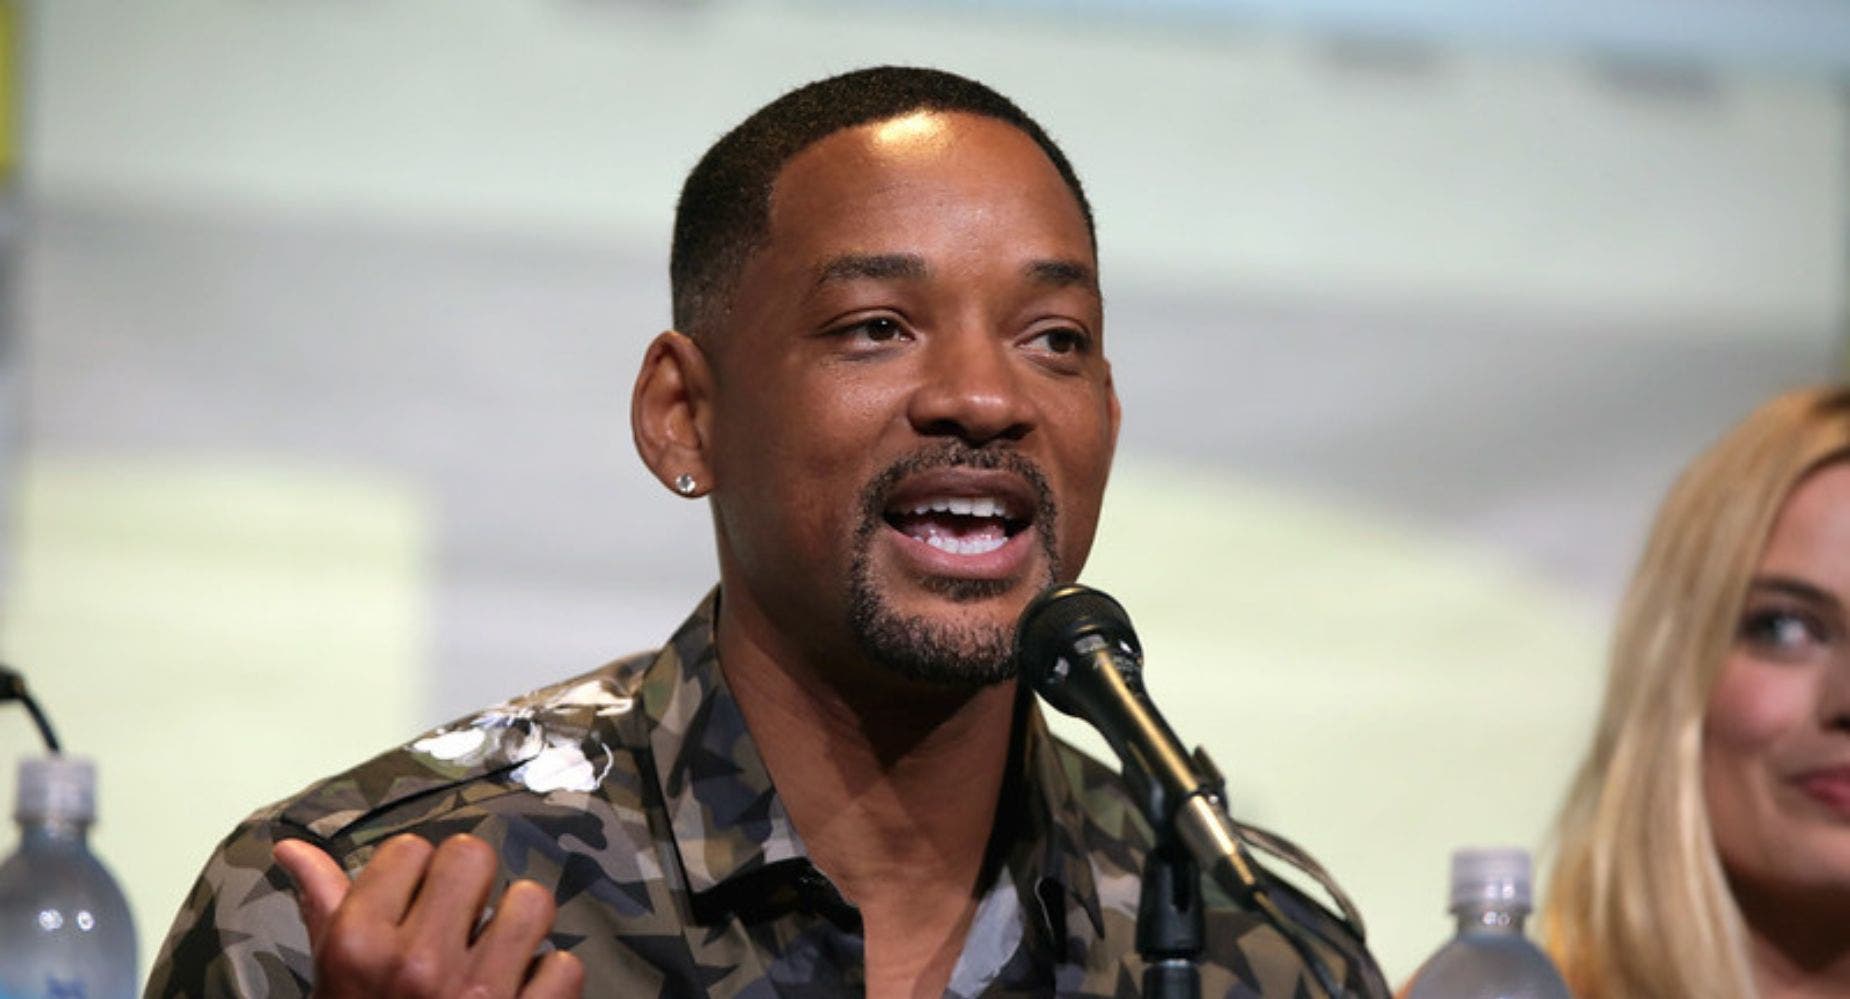 Will 'The Slap' Help Or Hurt Will Smith's AppleTV+ Thriller? 'Emancipation' Puts Academy Awards In Awkward Spot